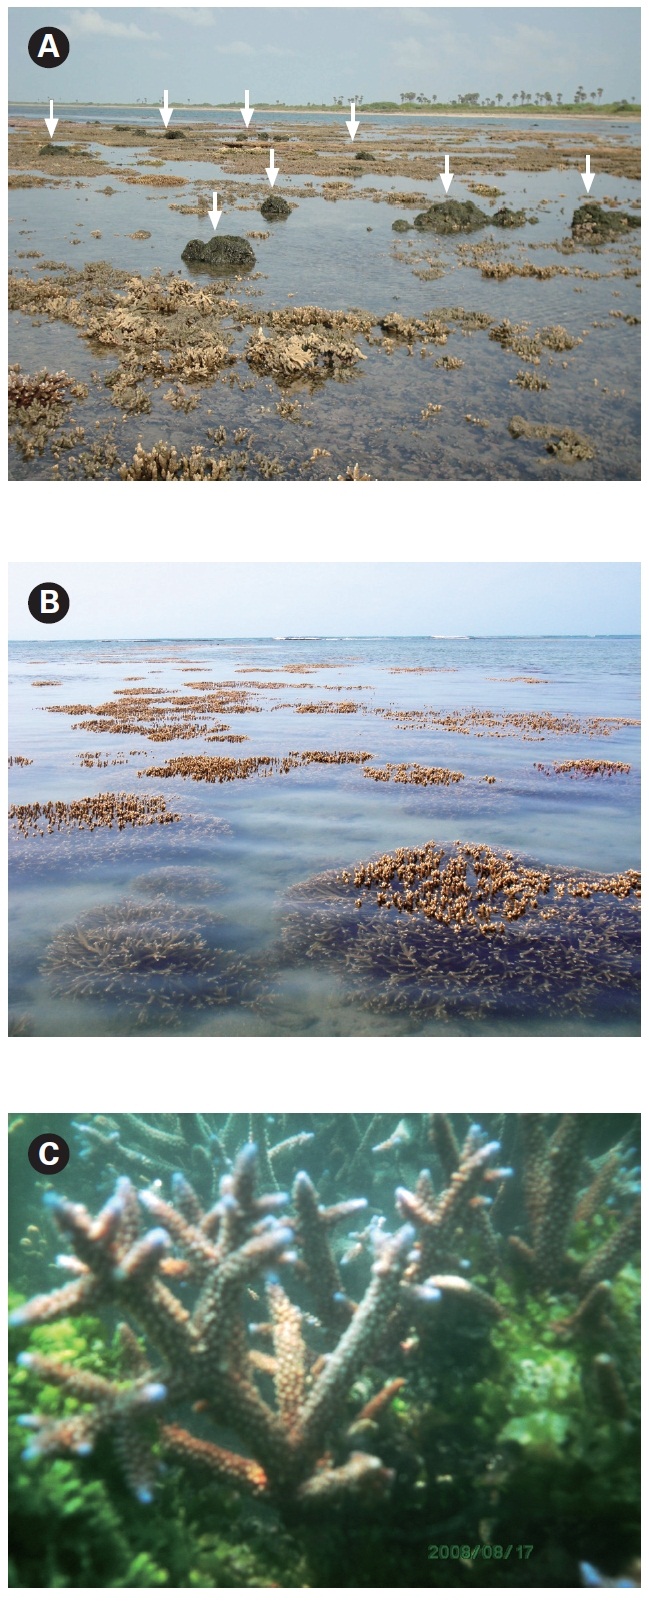 Sporadic growth of Kappahycus at Kurusadai Island. (A) Kappaphycus covers a very small part of Galaxuria point i.e. southeast portion of Kurusadai Island. The arrows show Kappaphycus attached to coral. (B) Most of the corals are free from the Kappaphycus attachement at Kurusadai Island. (C) Acropora corals spawn naturally with Kappaphycus alvarezii.